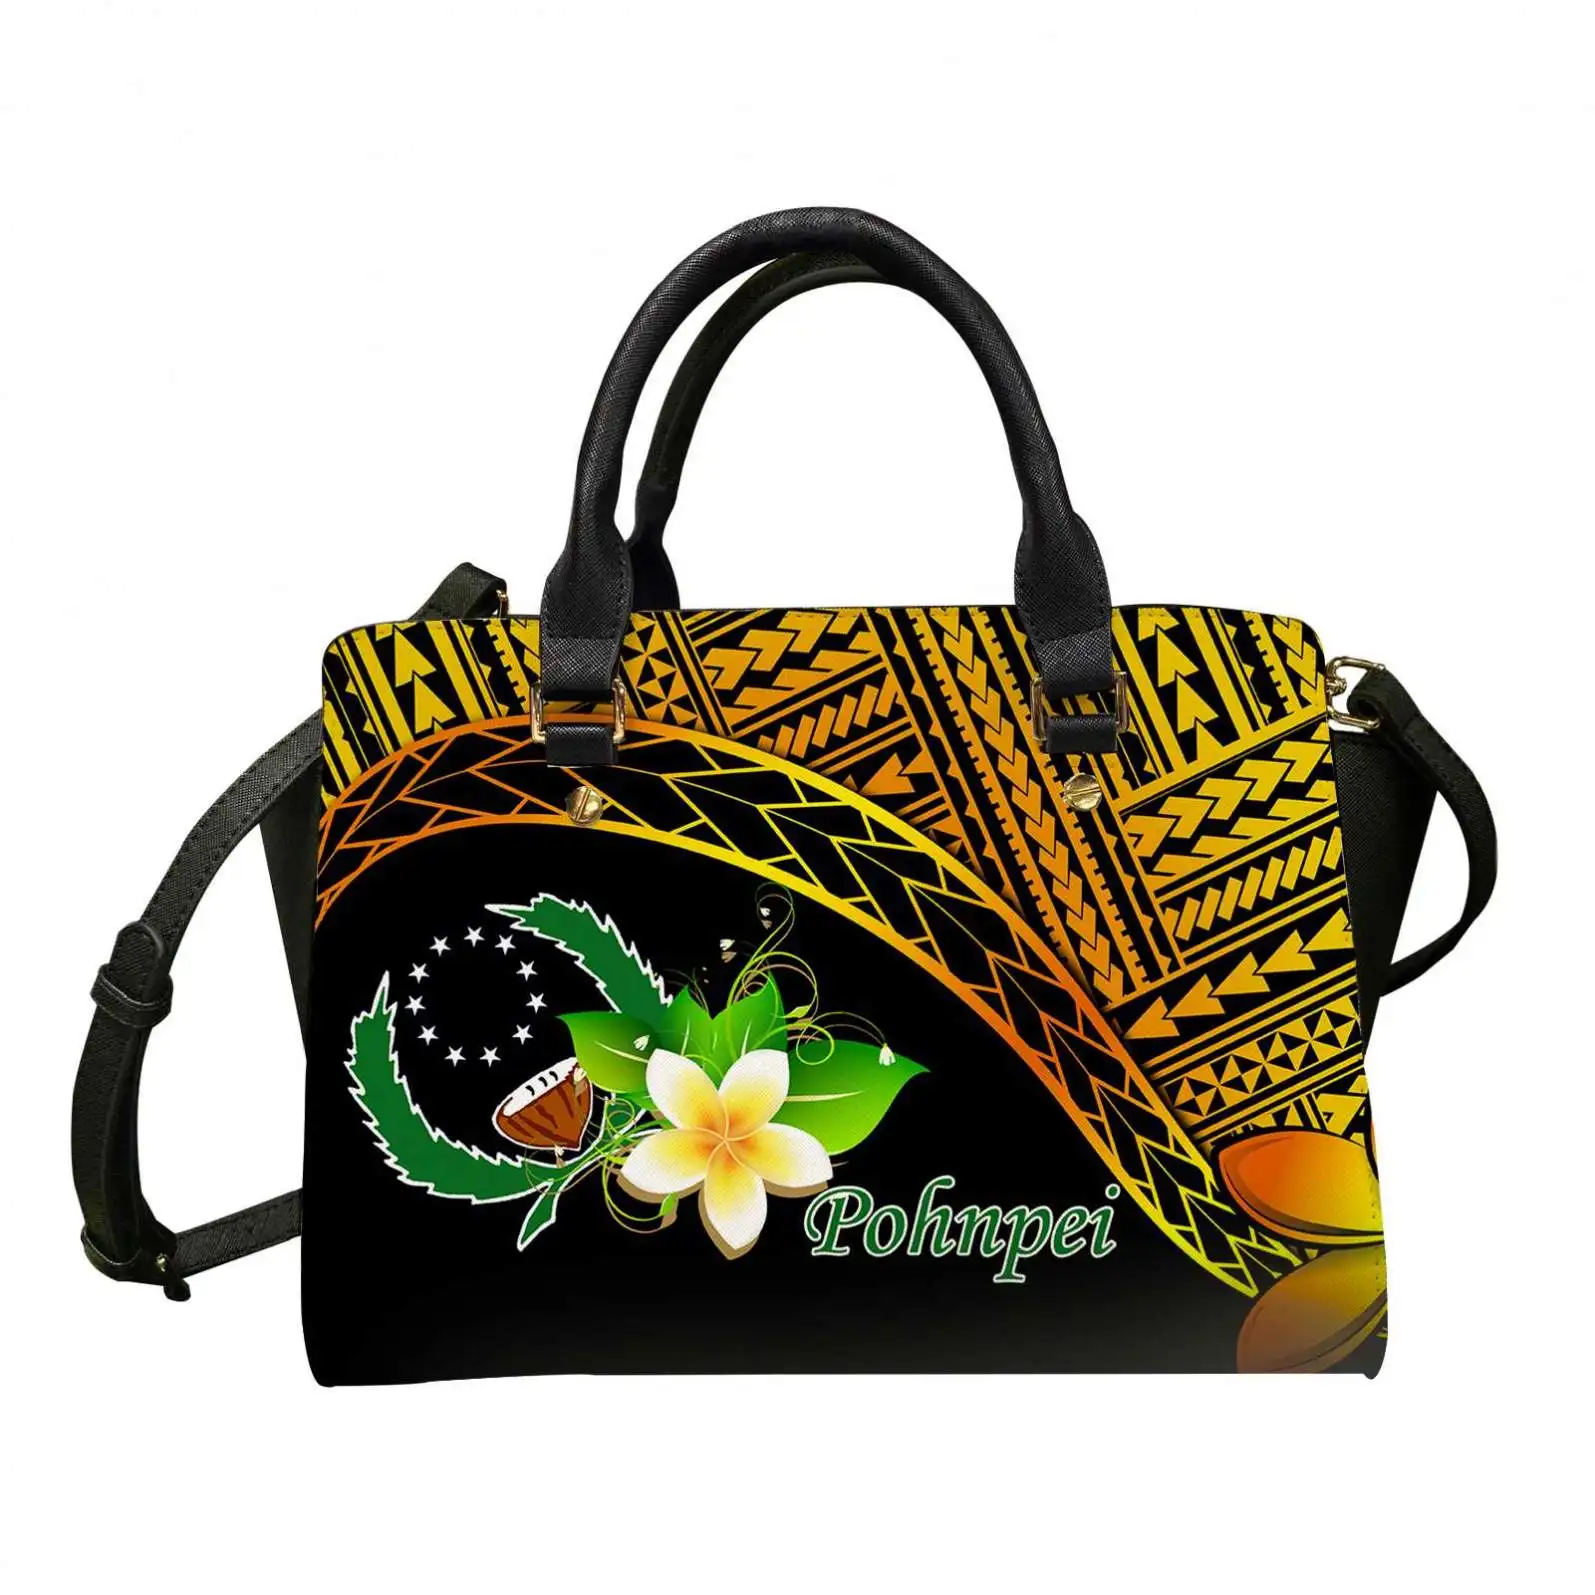 

Pohnpei Micronesian Gold Tribal Wave Printed Leather Handbags for Women Luxury Satchel Purses Shoulder Bags for Lady Work Bags, Accept custom made